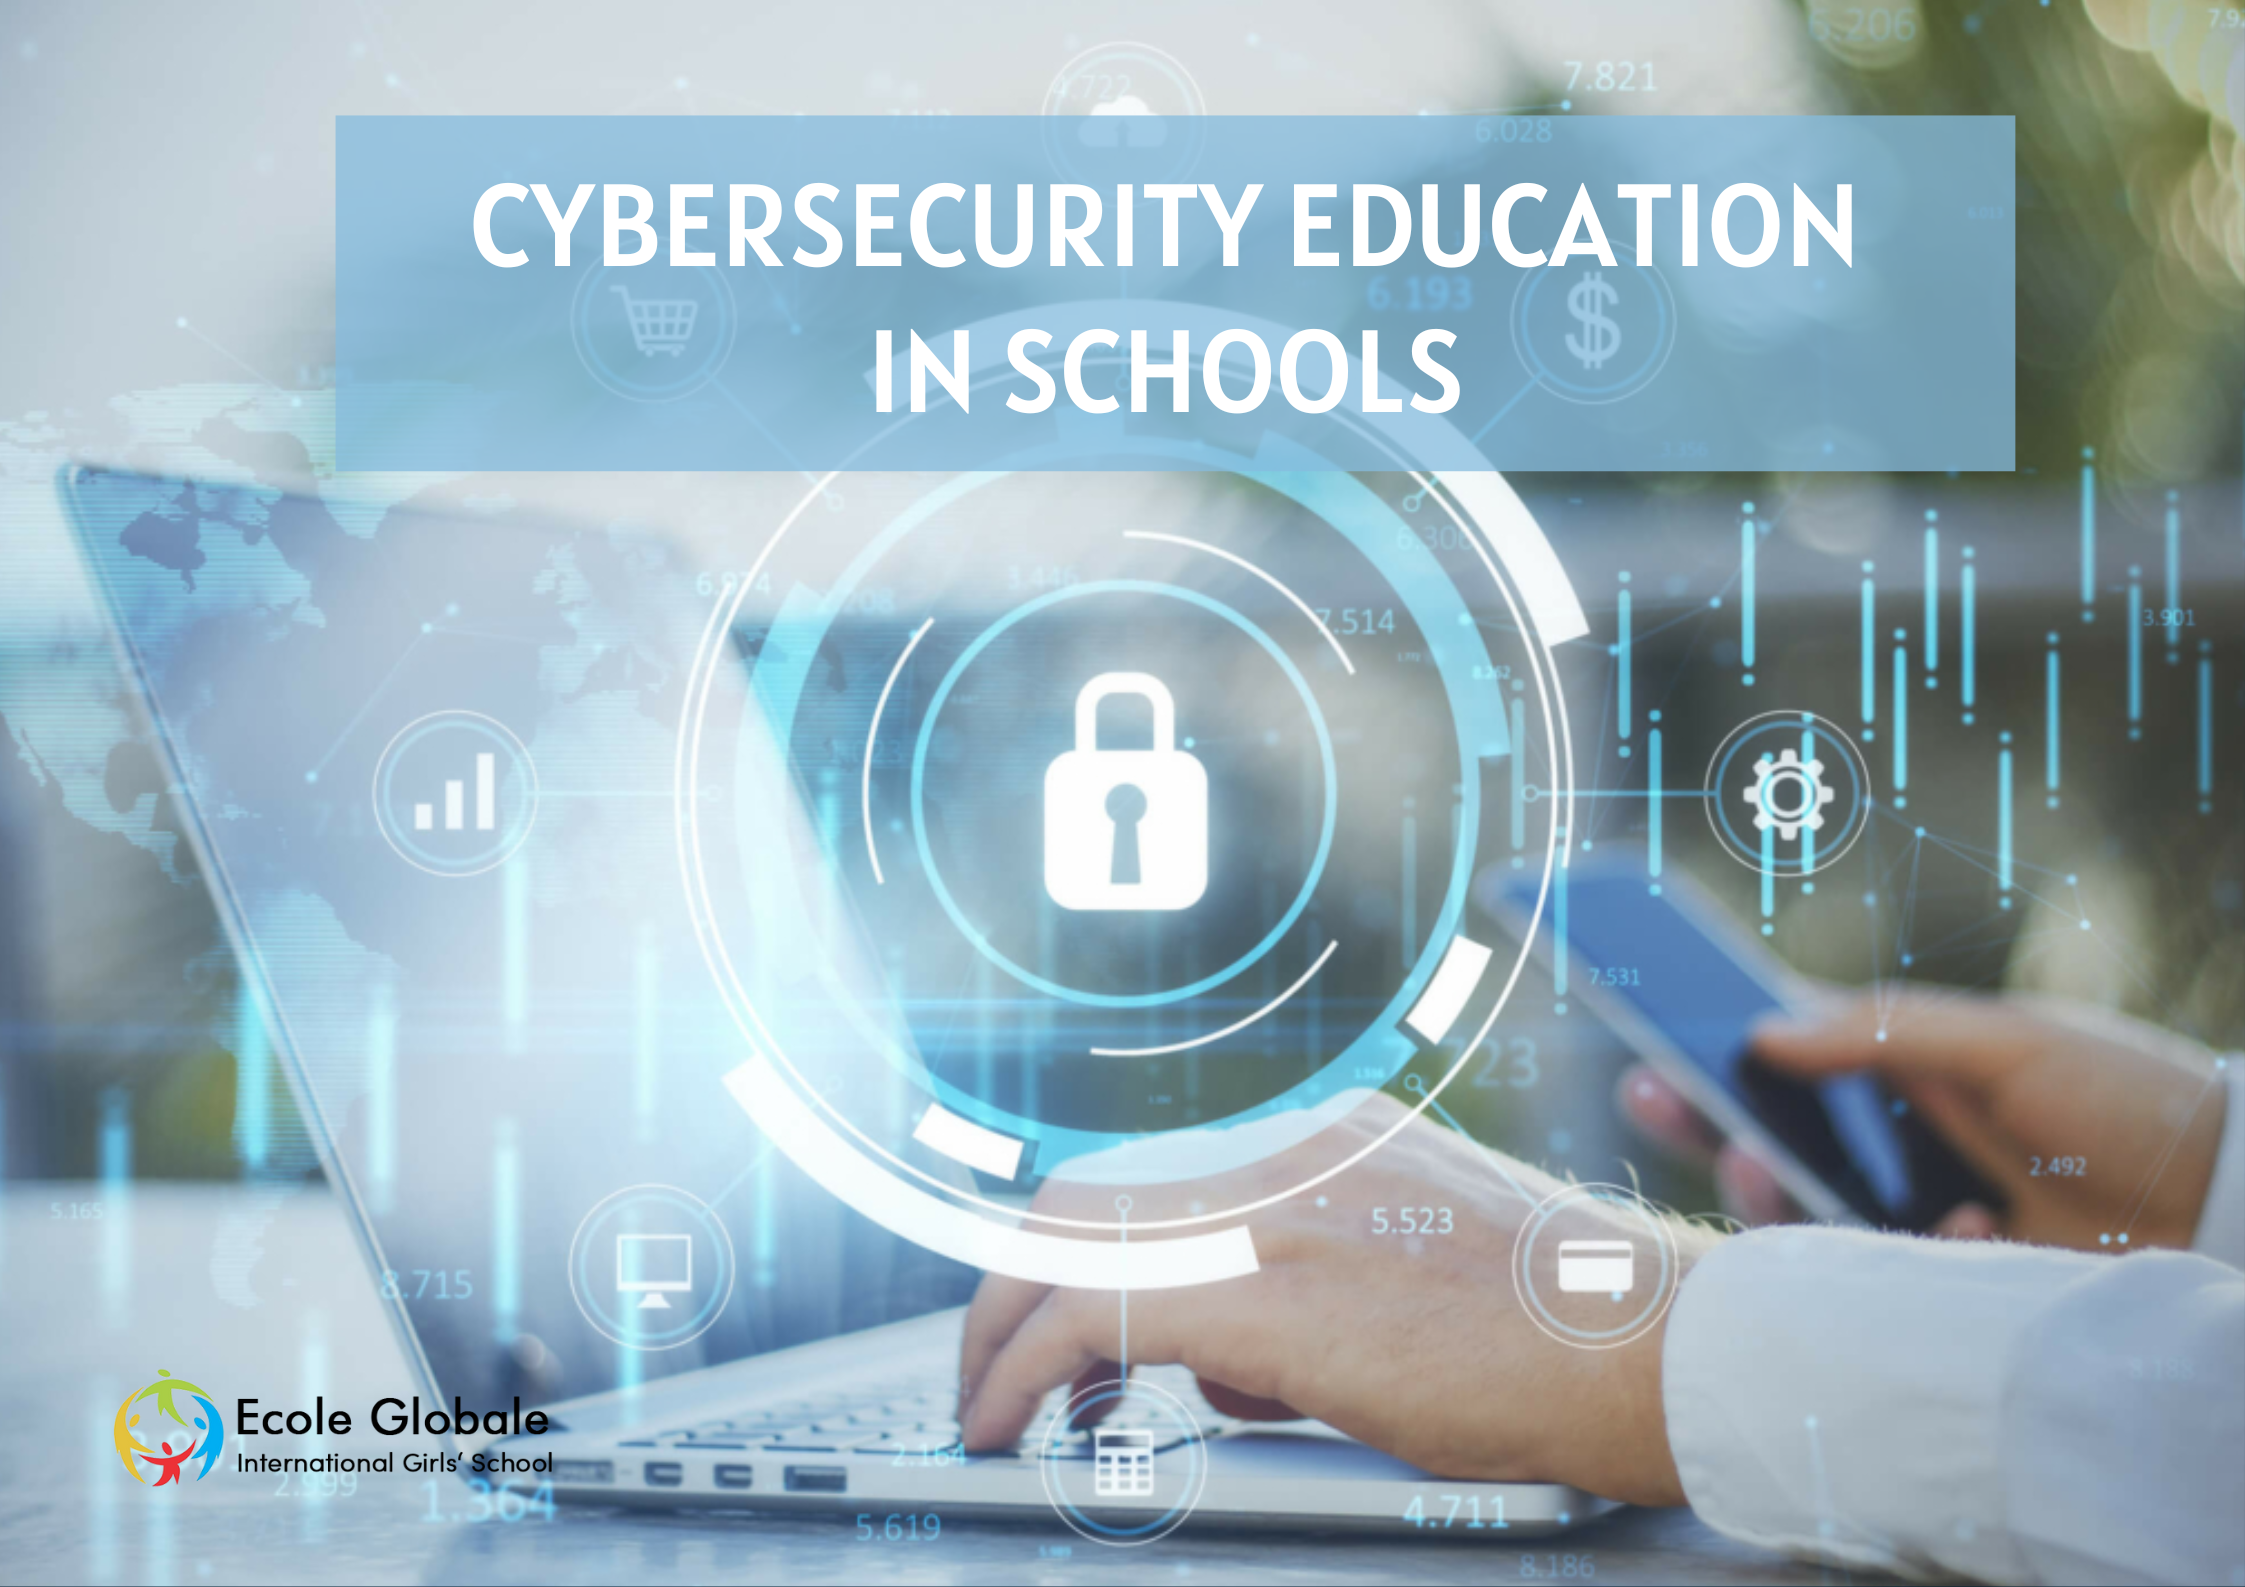 You are currently viewing The Importance of Cybersecurity Education in Schools: Ecole Globale’s Approach